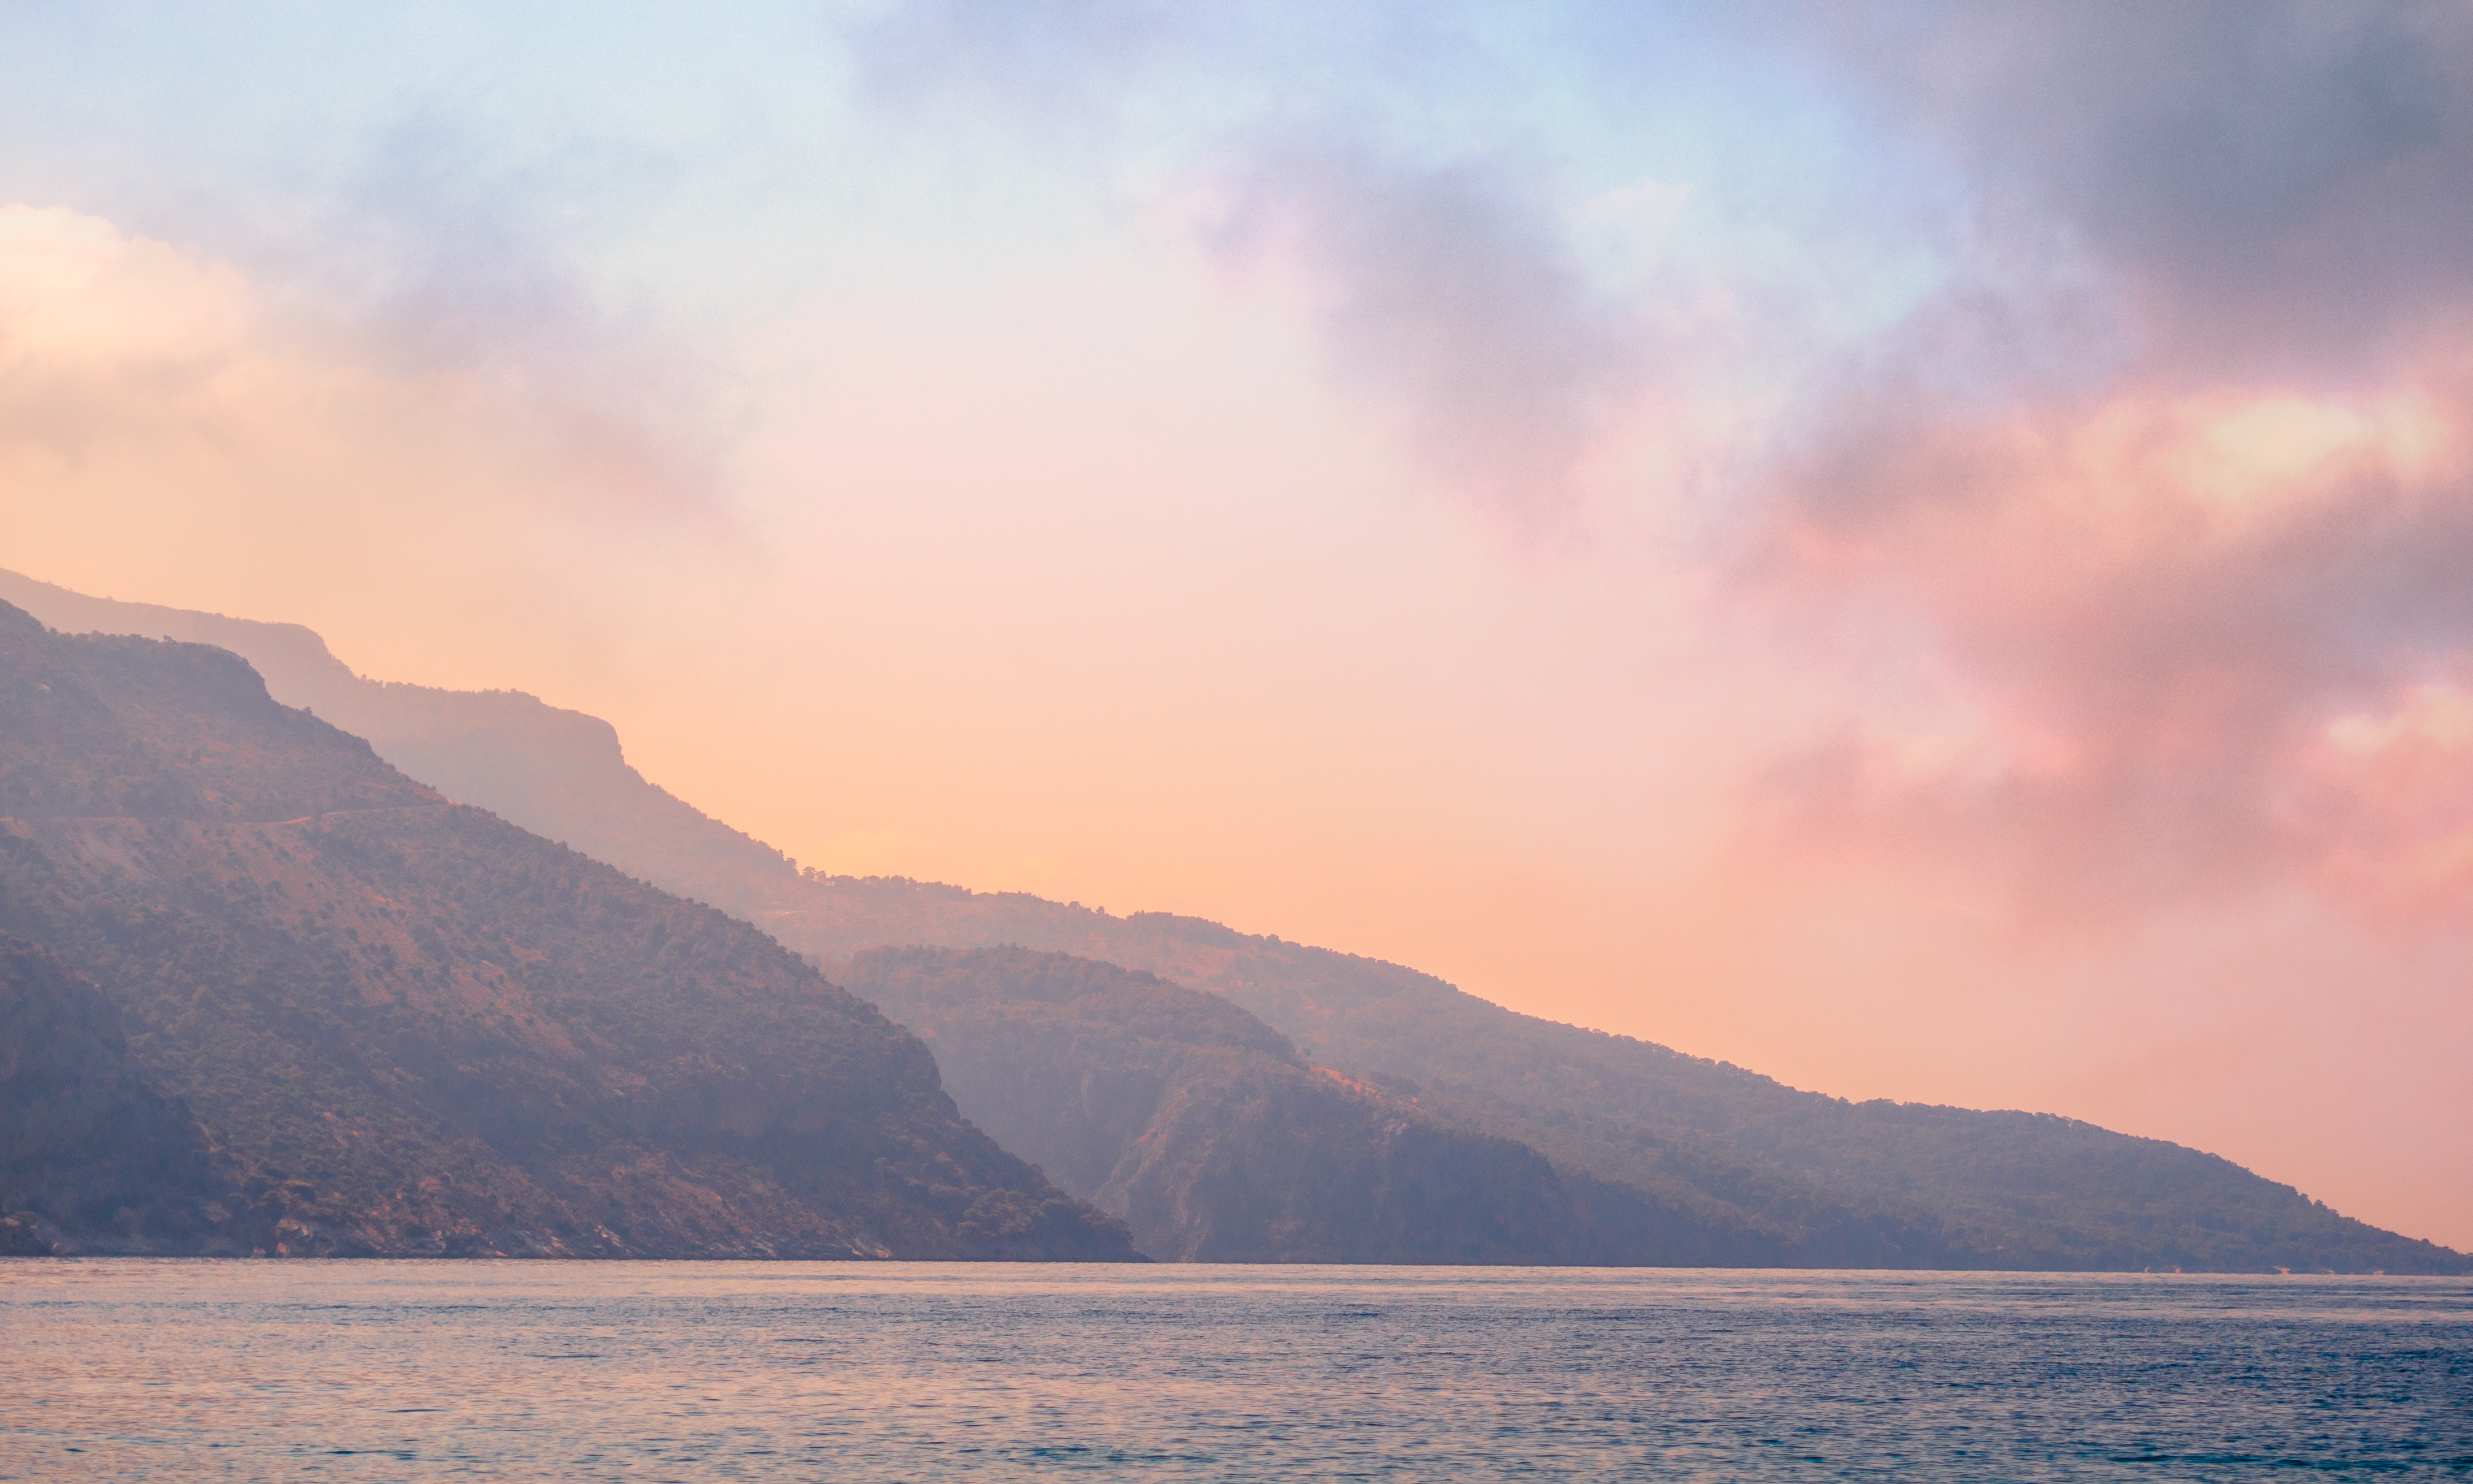 Mountains landscape on the coast at sunrise - serenity and rose quartz colors.